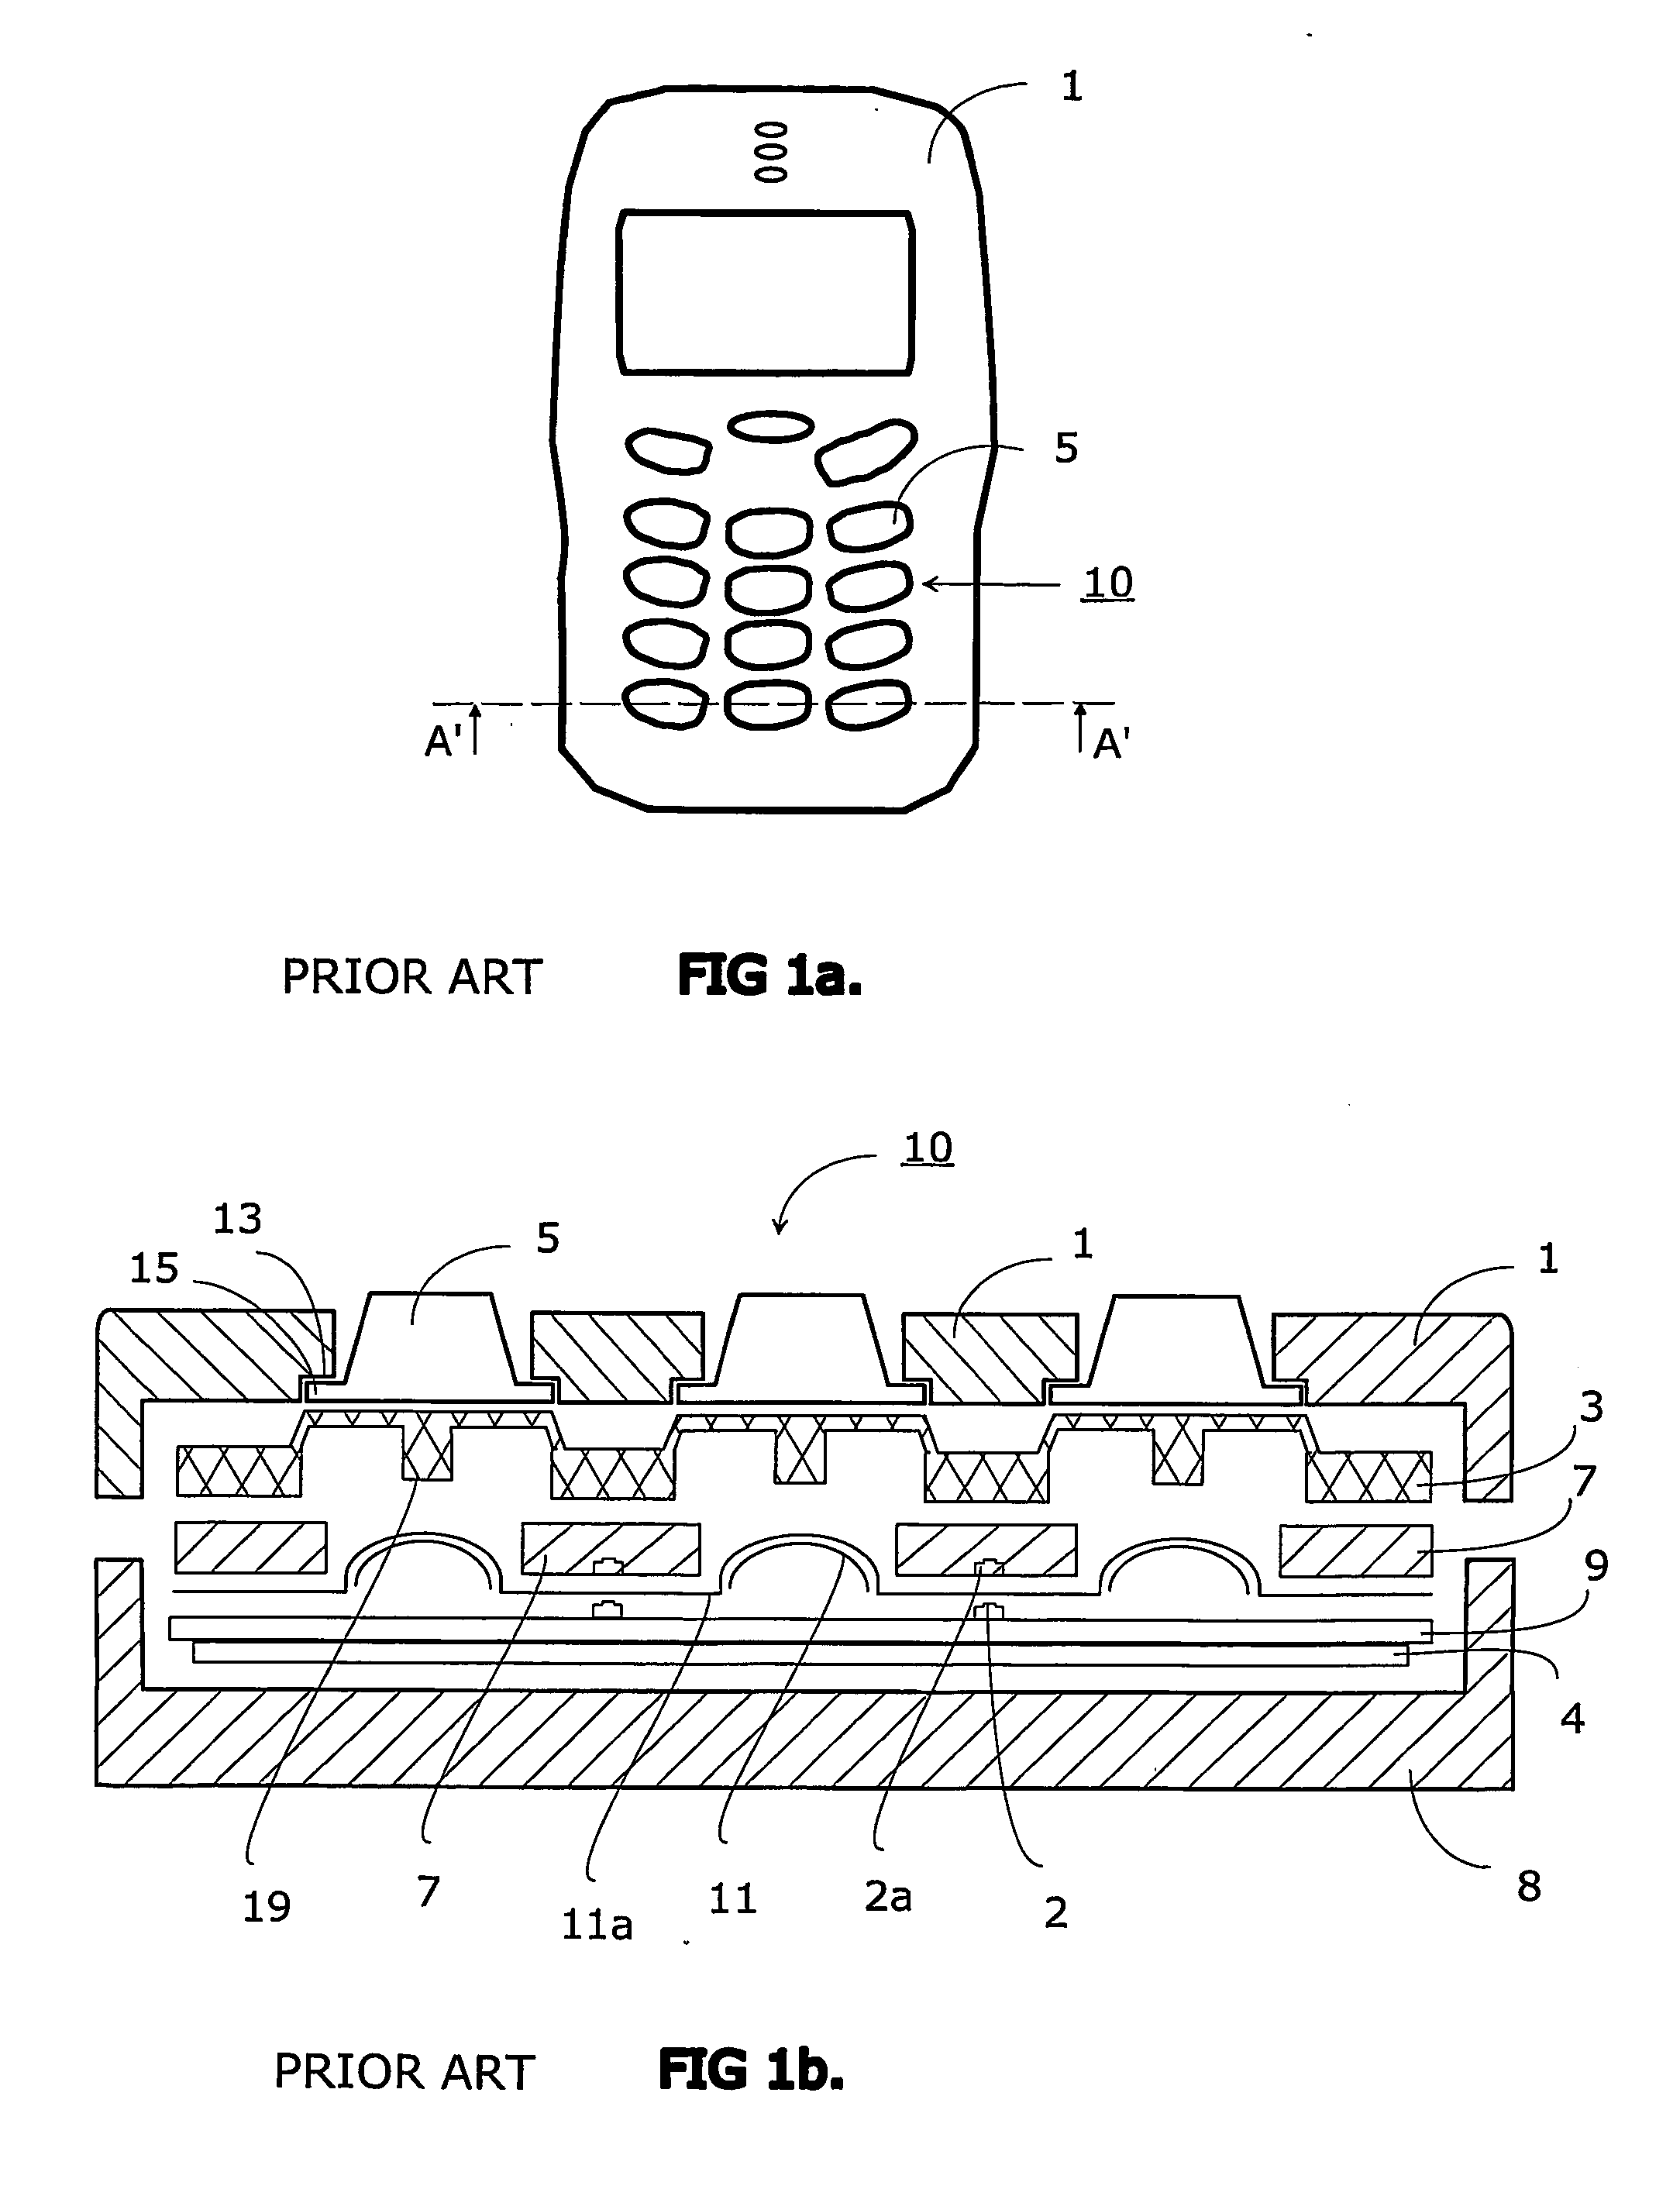 Keyboard with key supporting structure for portable electronics devices